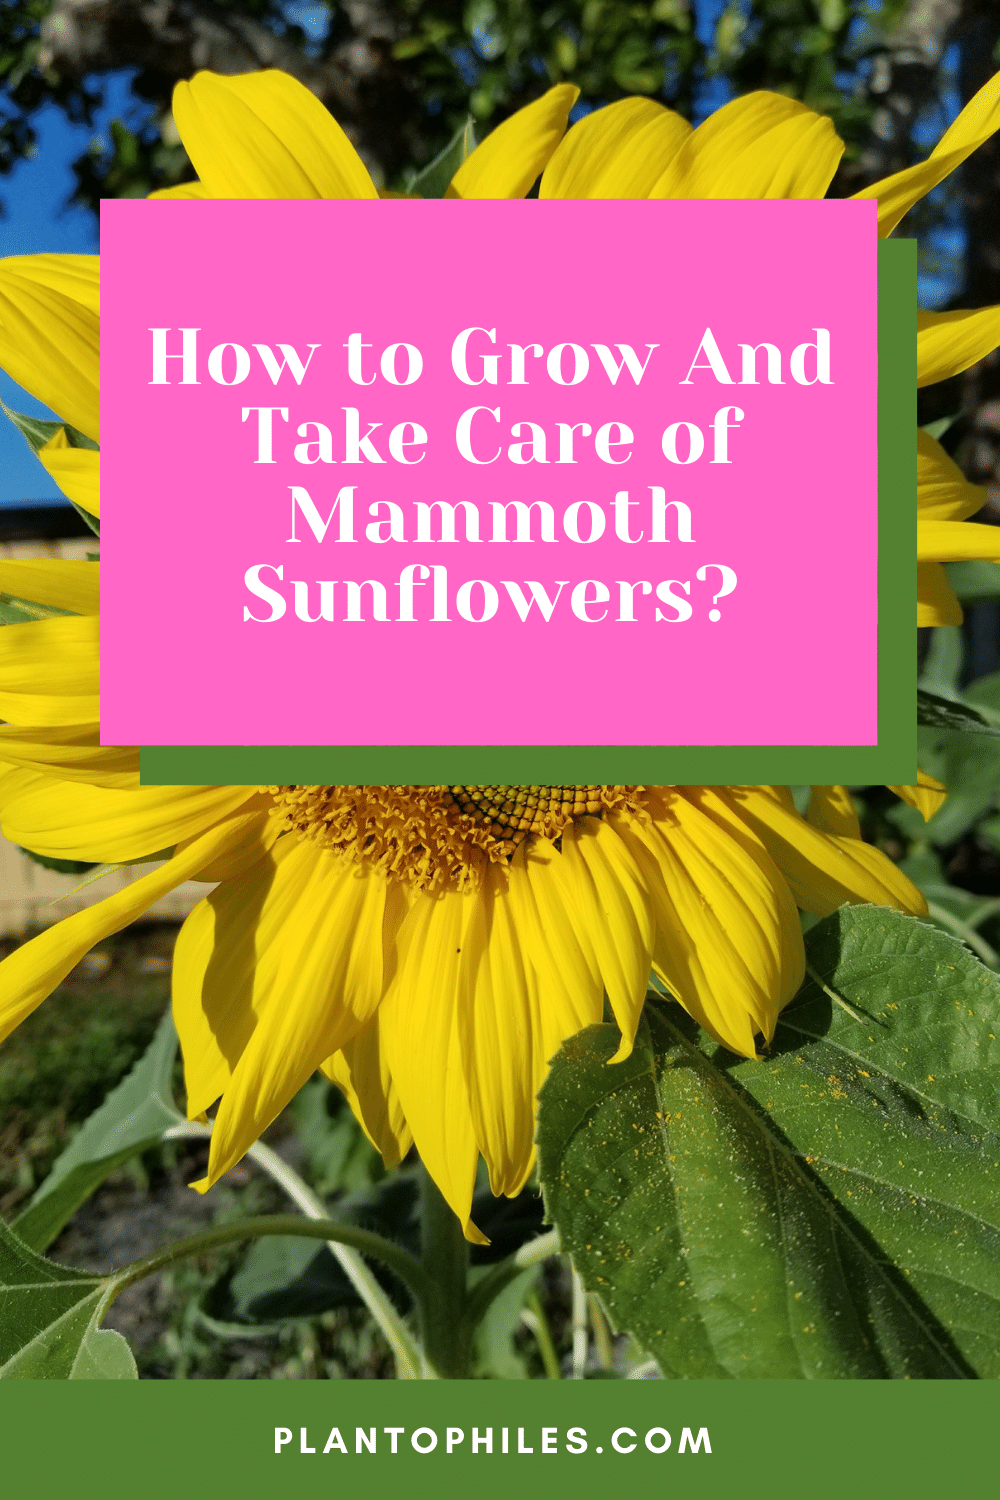 How to Grow And Take Care of Mammoth Sunflowers